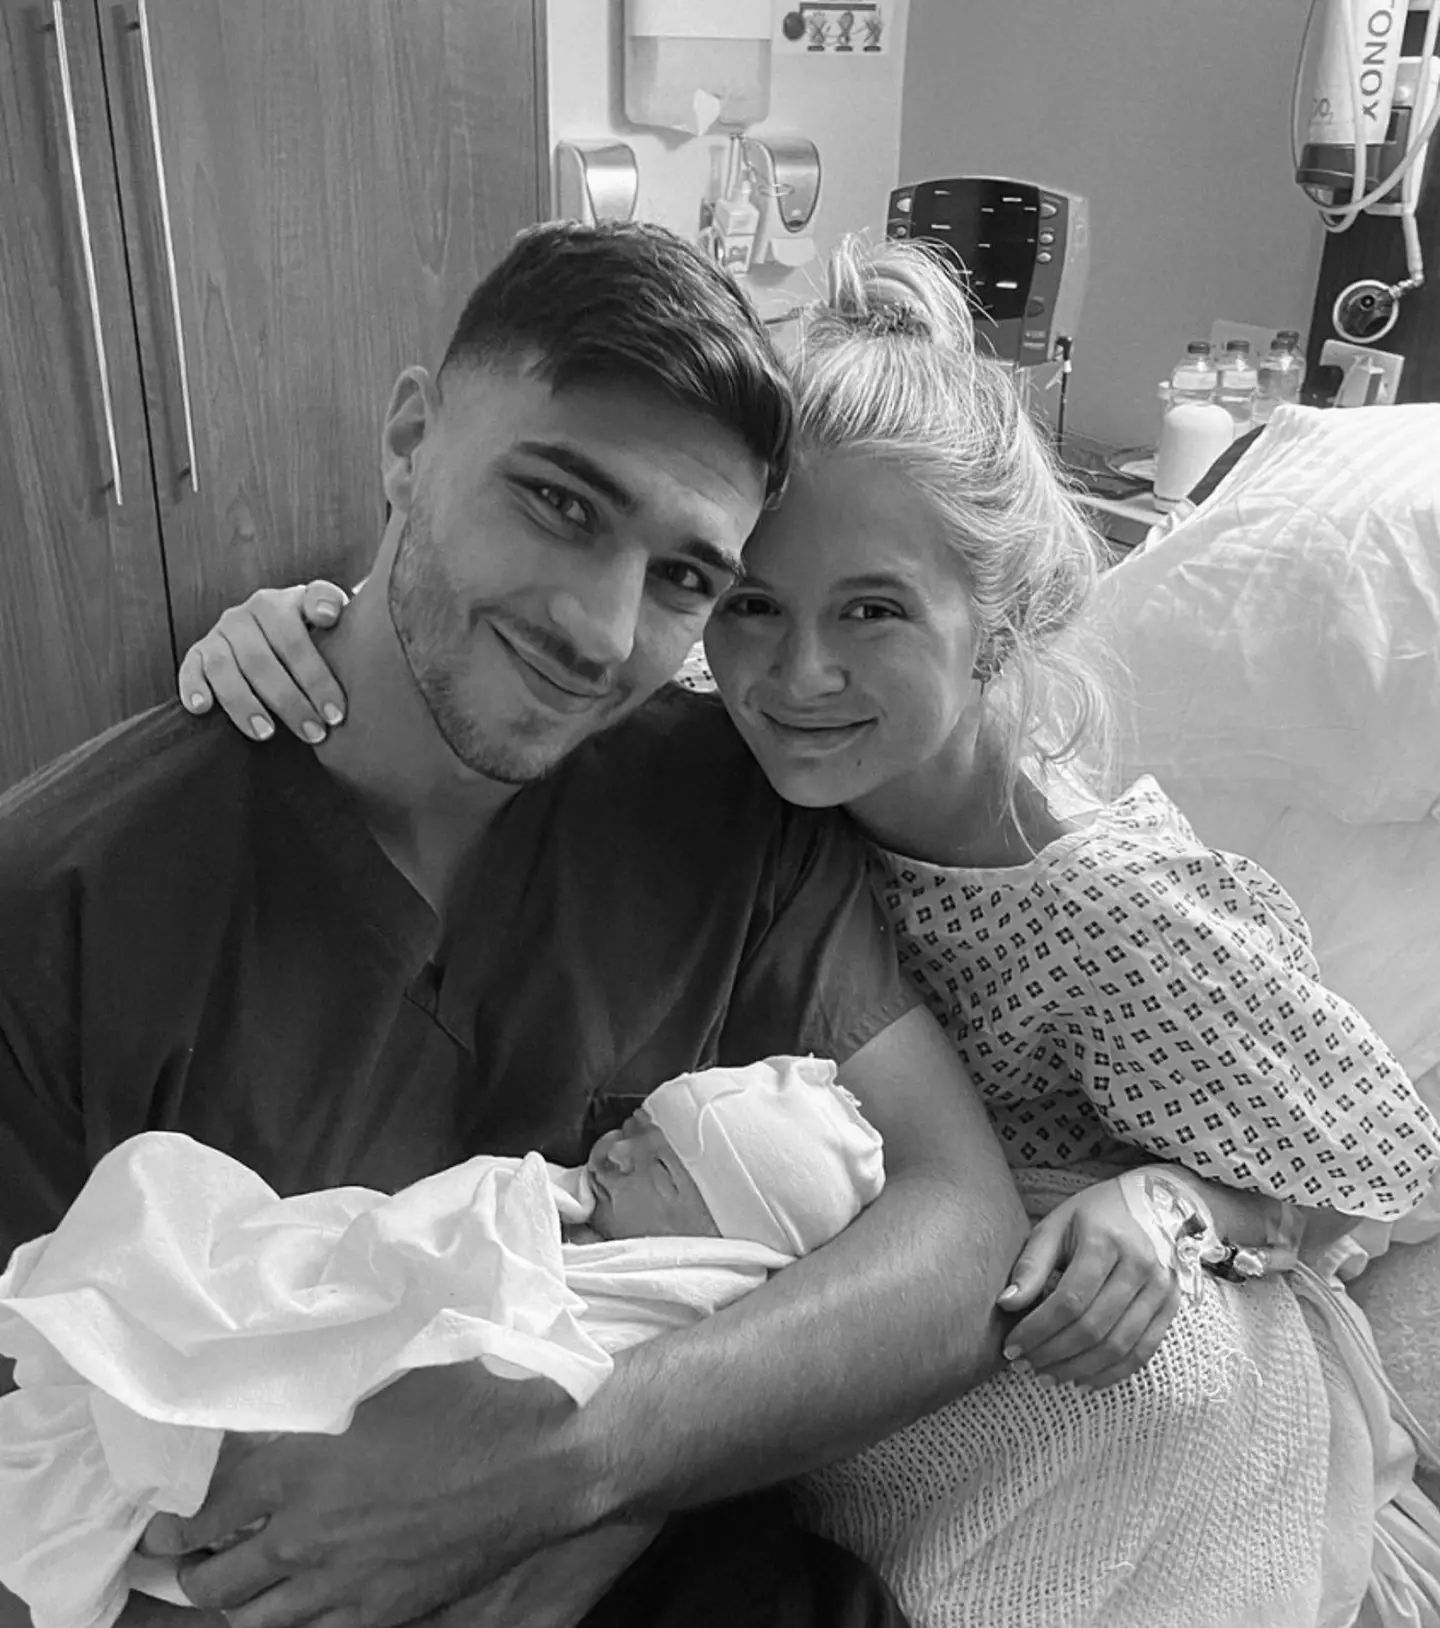 Tommy, 23 and Molly, also 23, announced the birth of their daughter on Instagram on Monday evening.